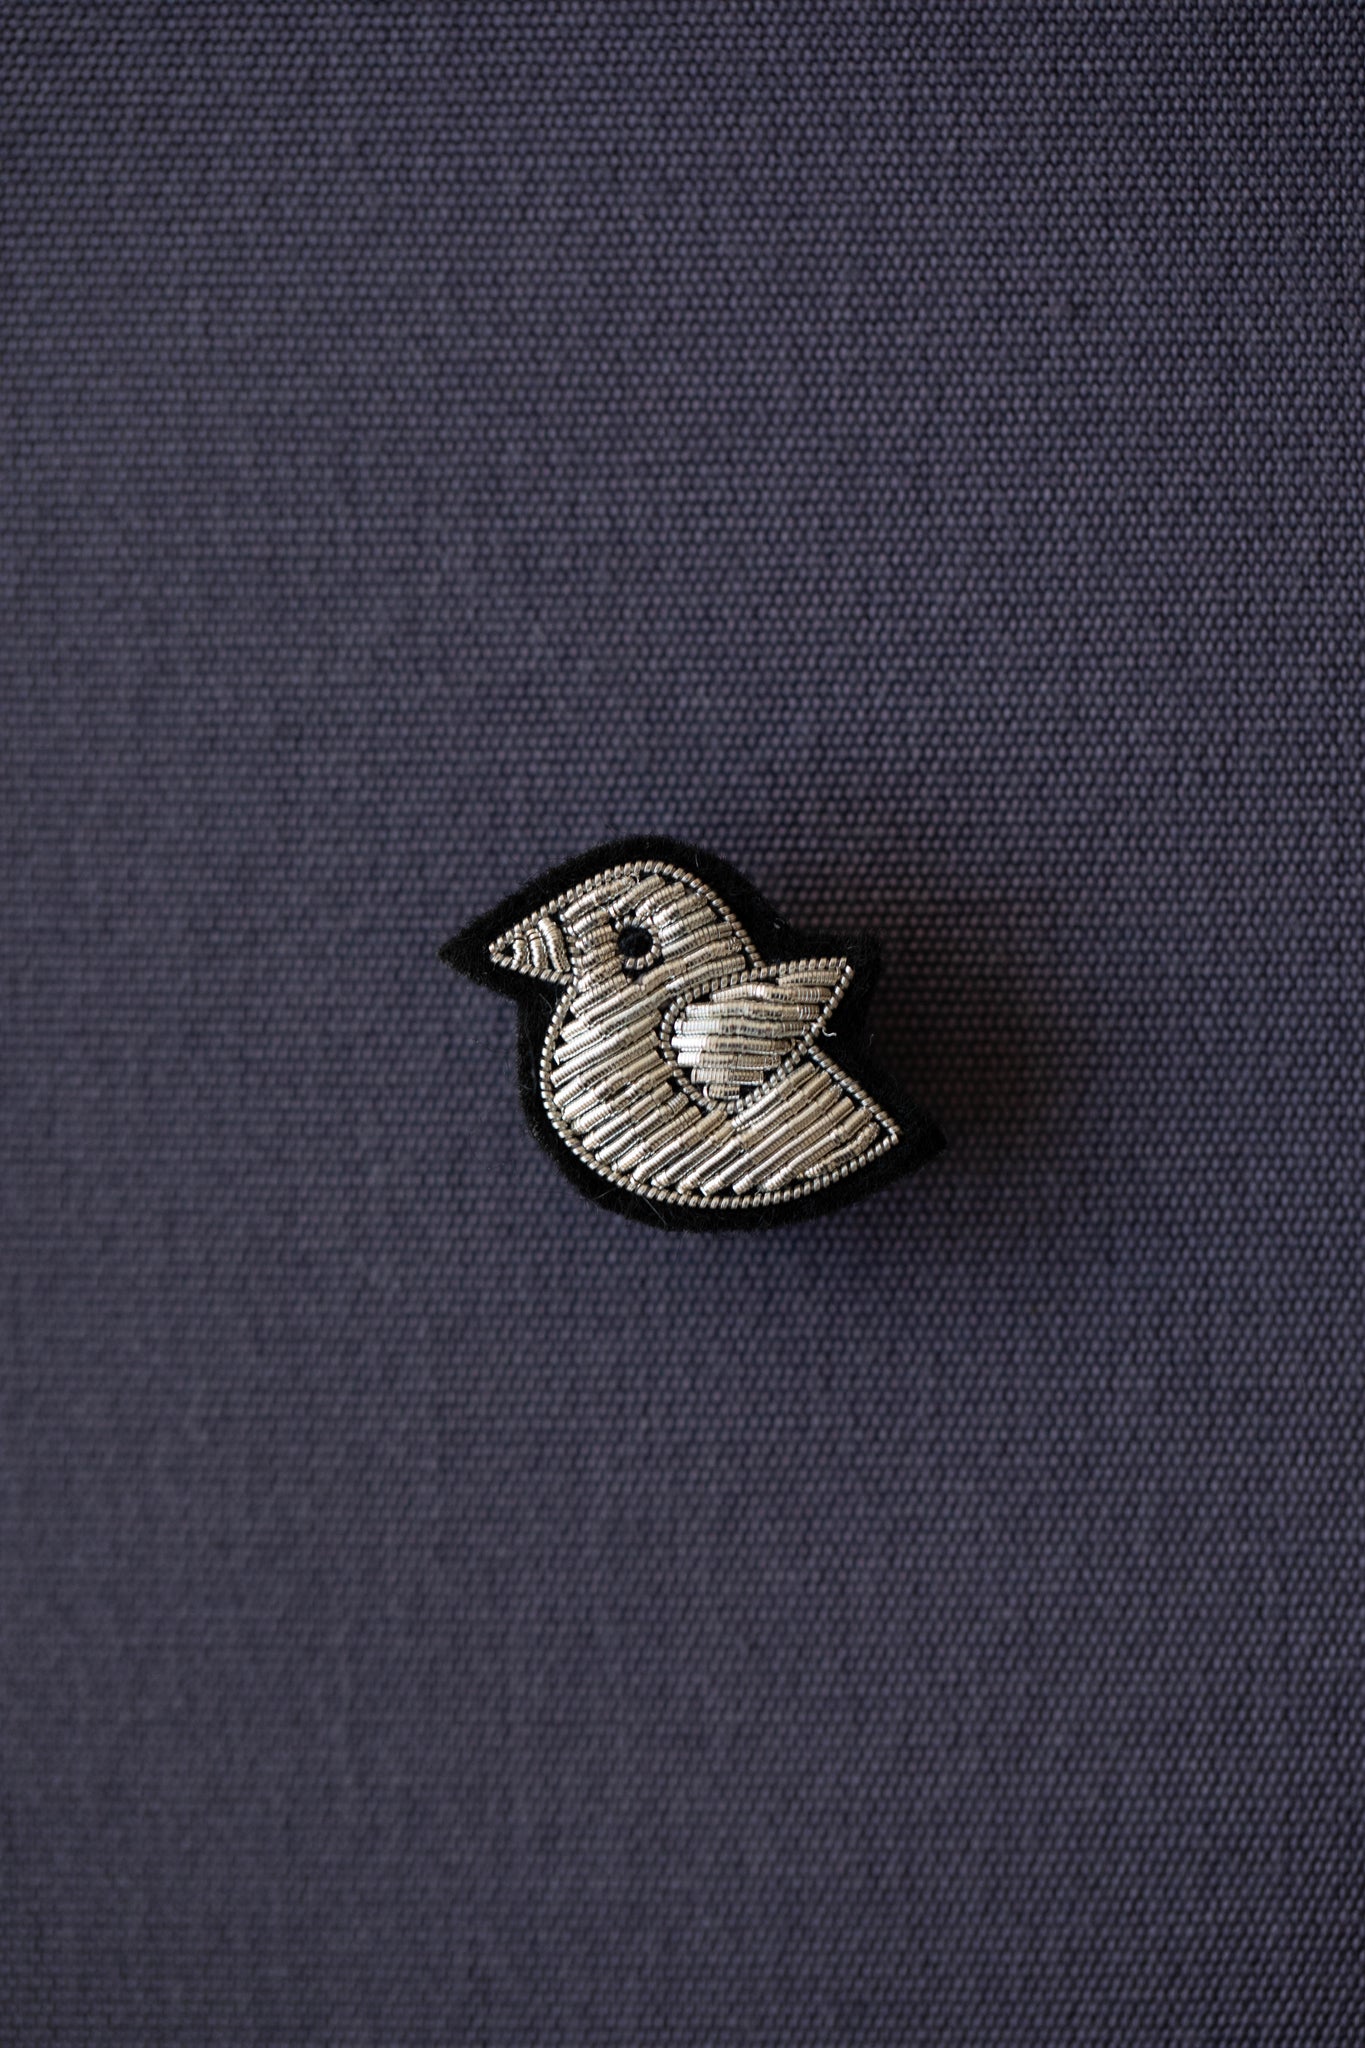 Embroidered Pins- Creatures